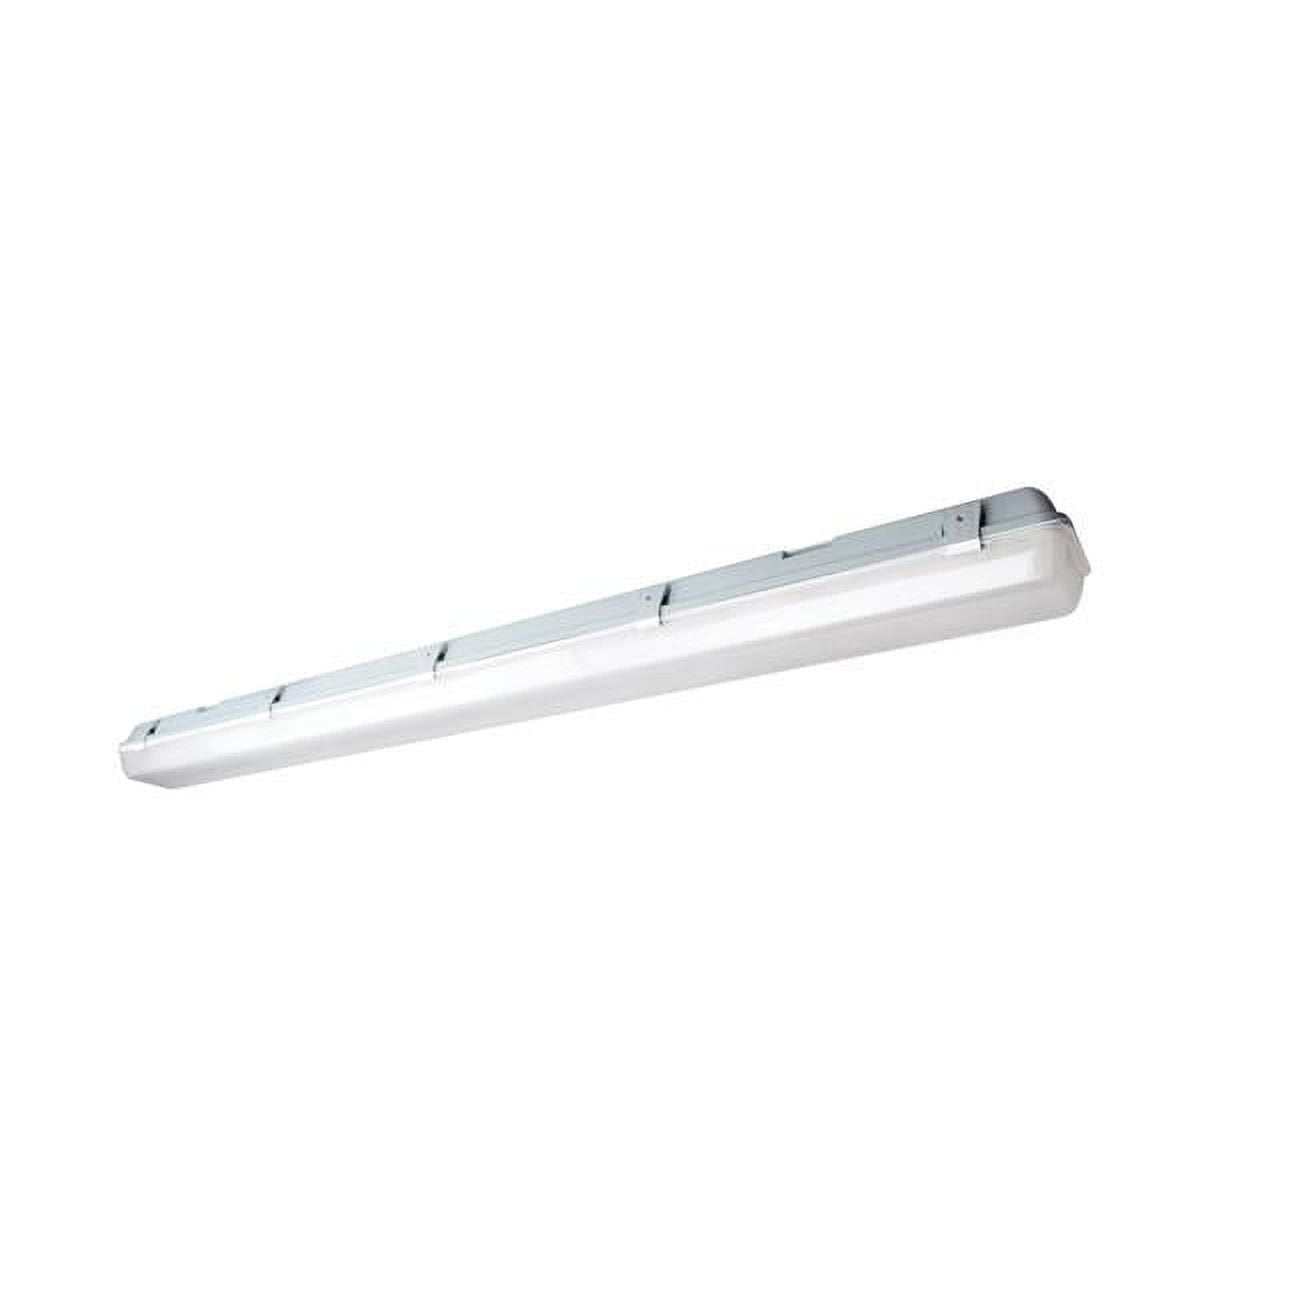 Picture of Satco Nuvo 3008615 50 in. 29 watts T8 Vapor Proof Fixture - White & Gray